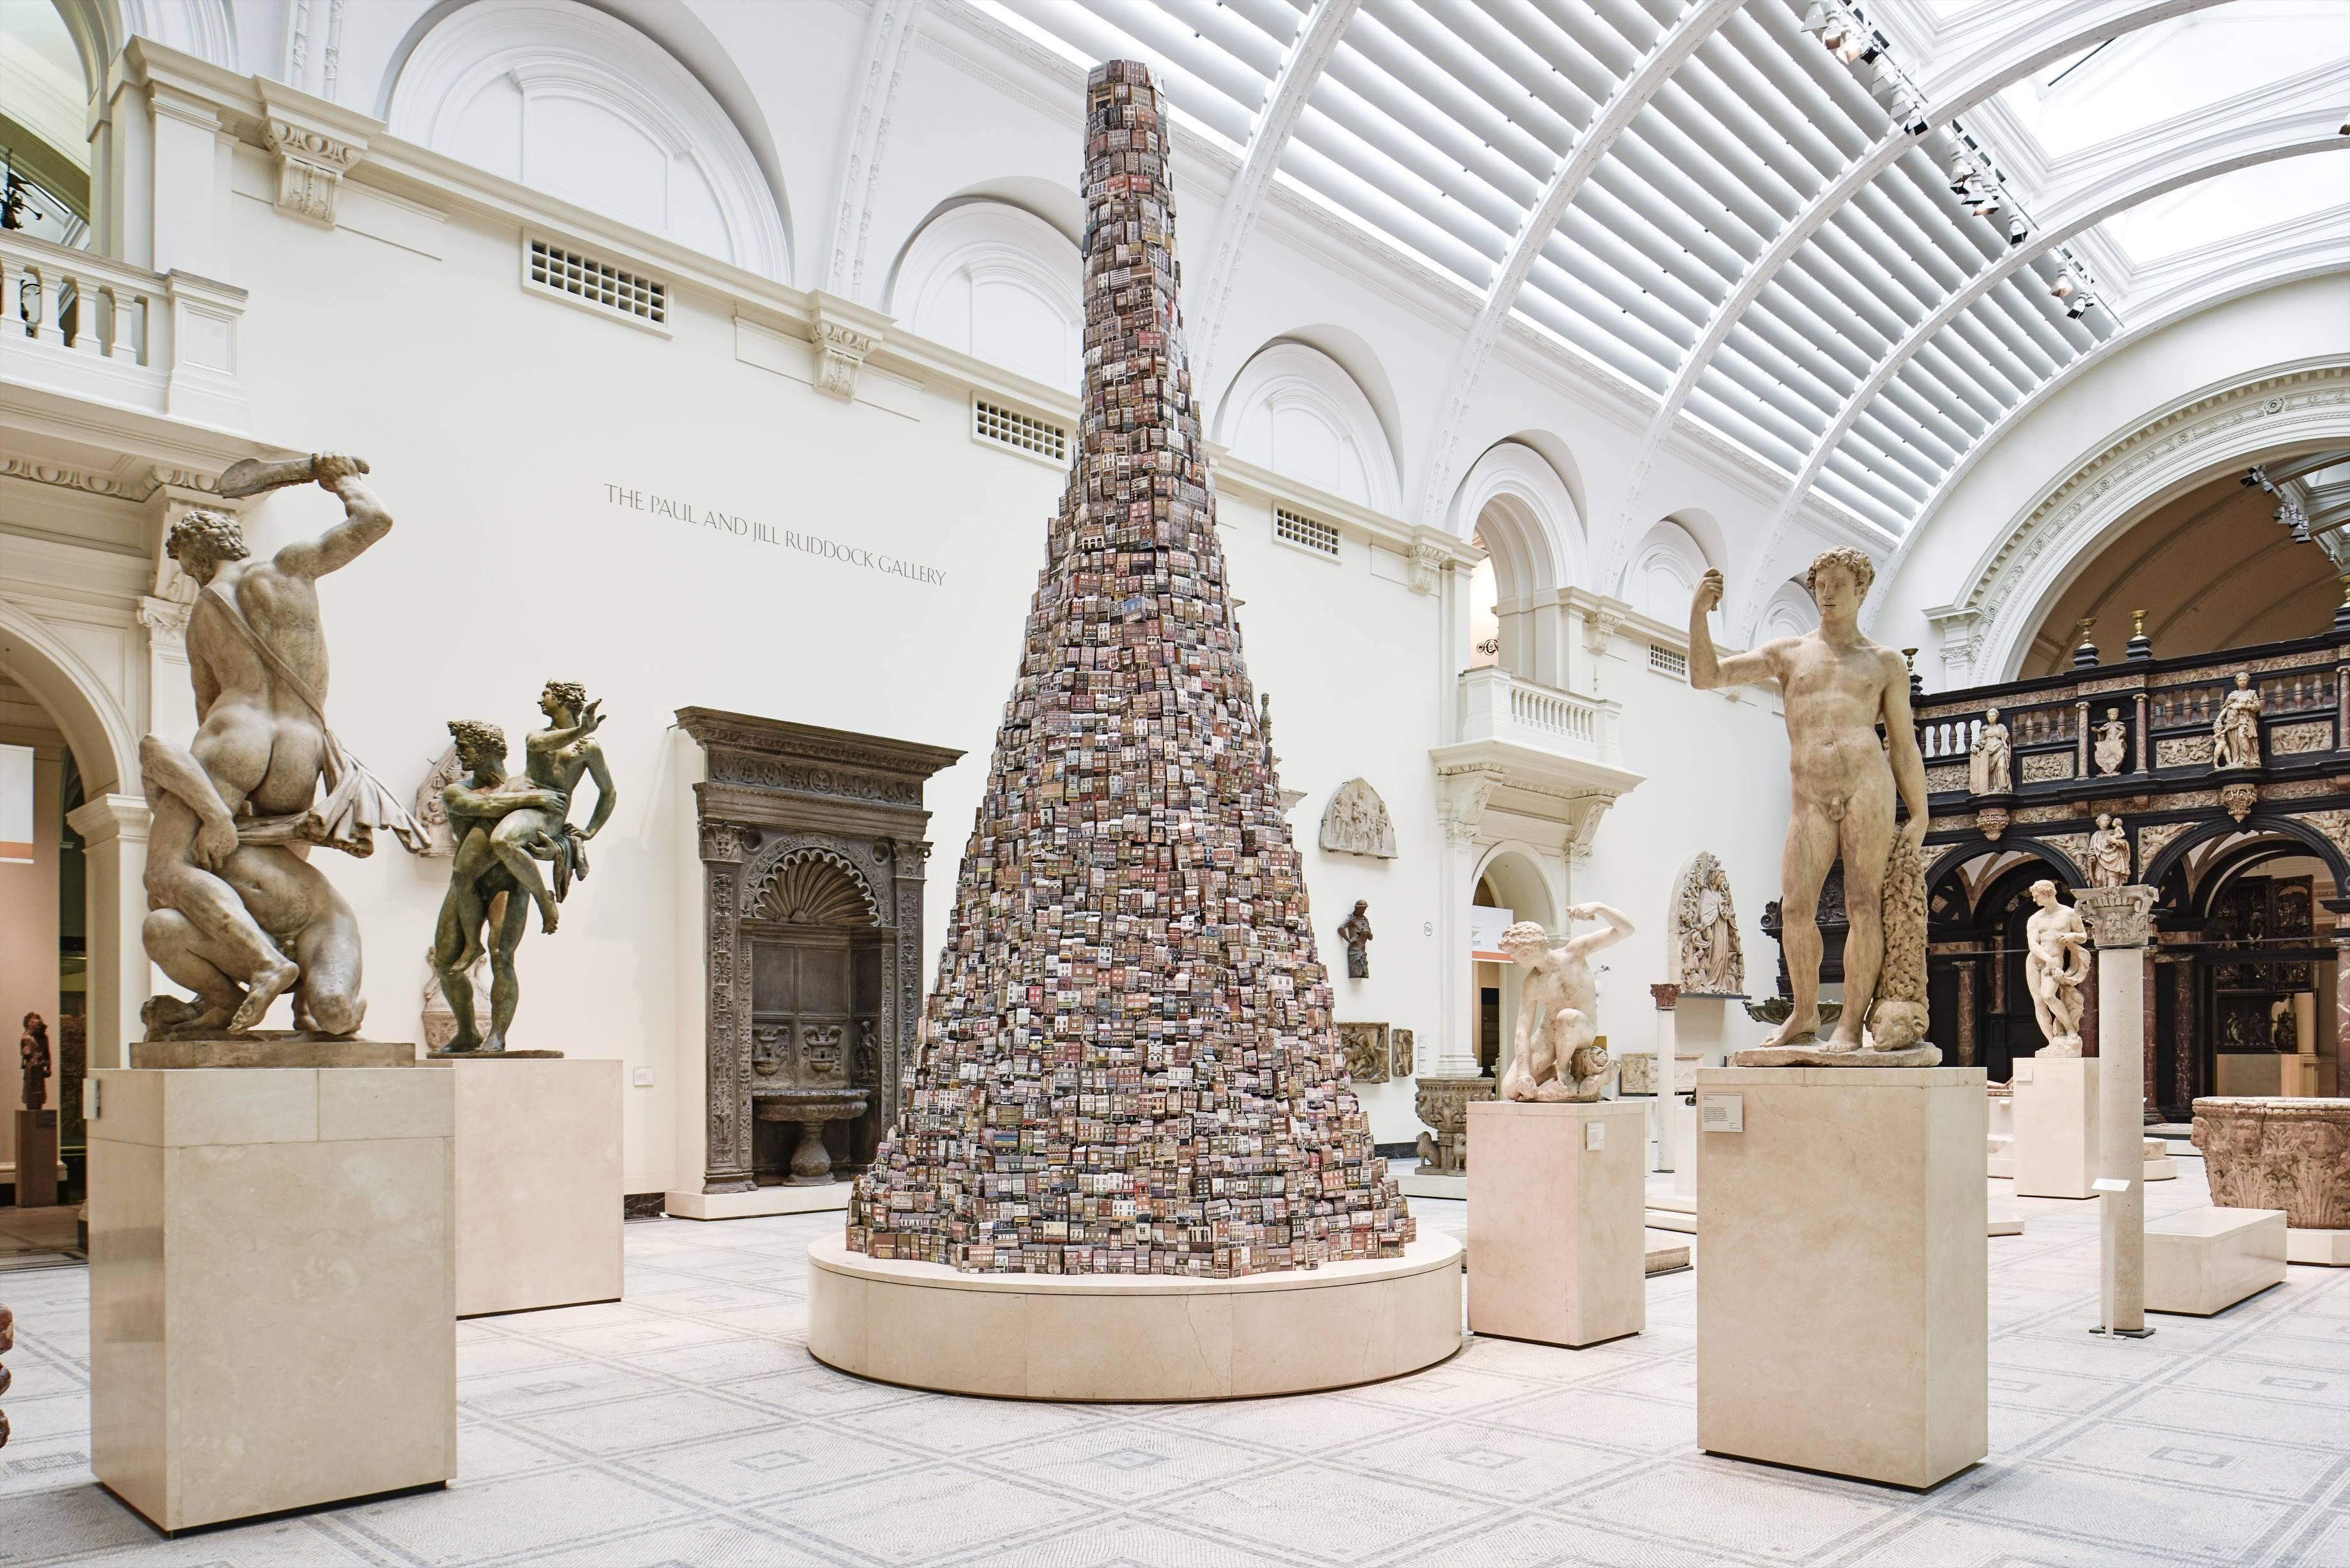 Created especially for the V&A by artist Barnaby Barford, The Tower of Babel was displayed in the V&A Medieval & Renaissance Galleries from 8 September to 1 November 2015.   

The Tower of Babel is Barnaby Barfordäó»s representation of London today.